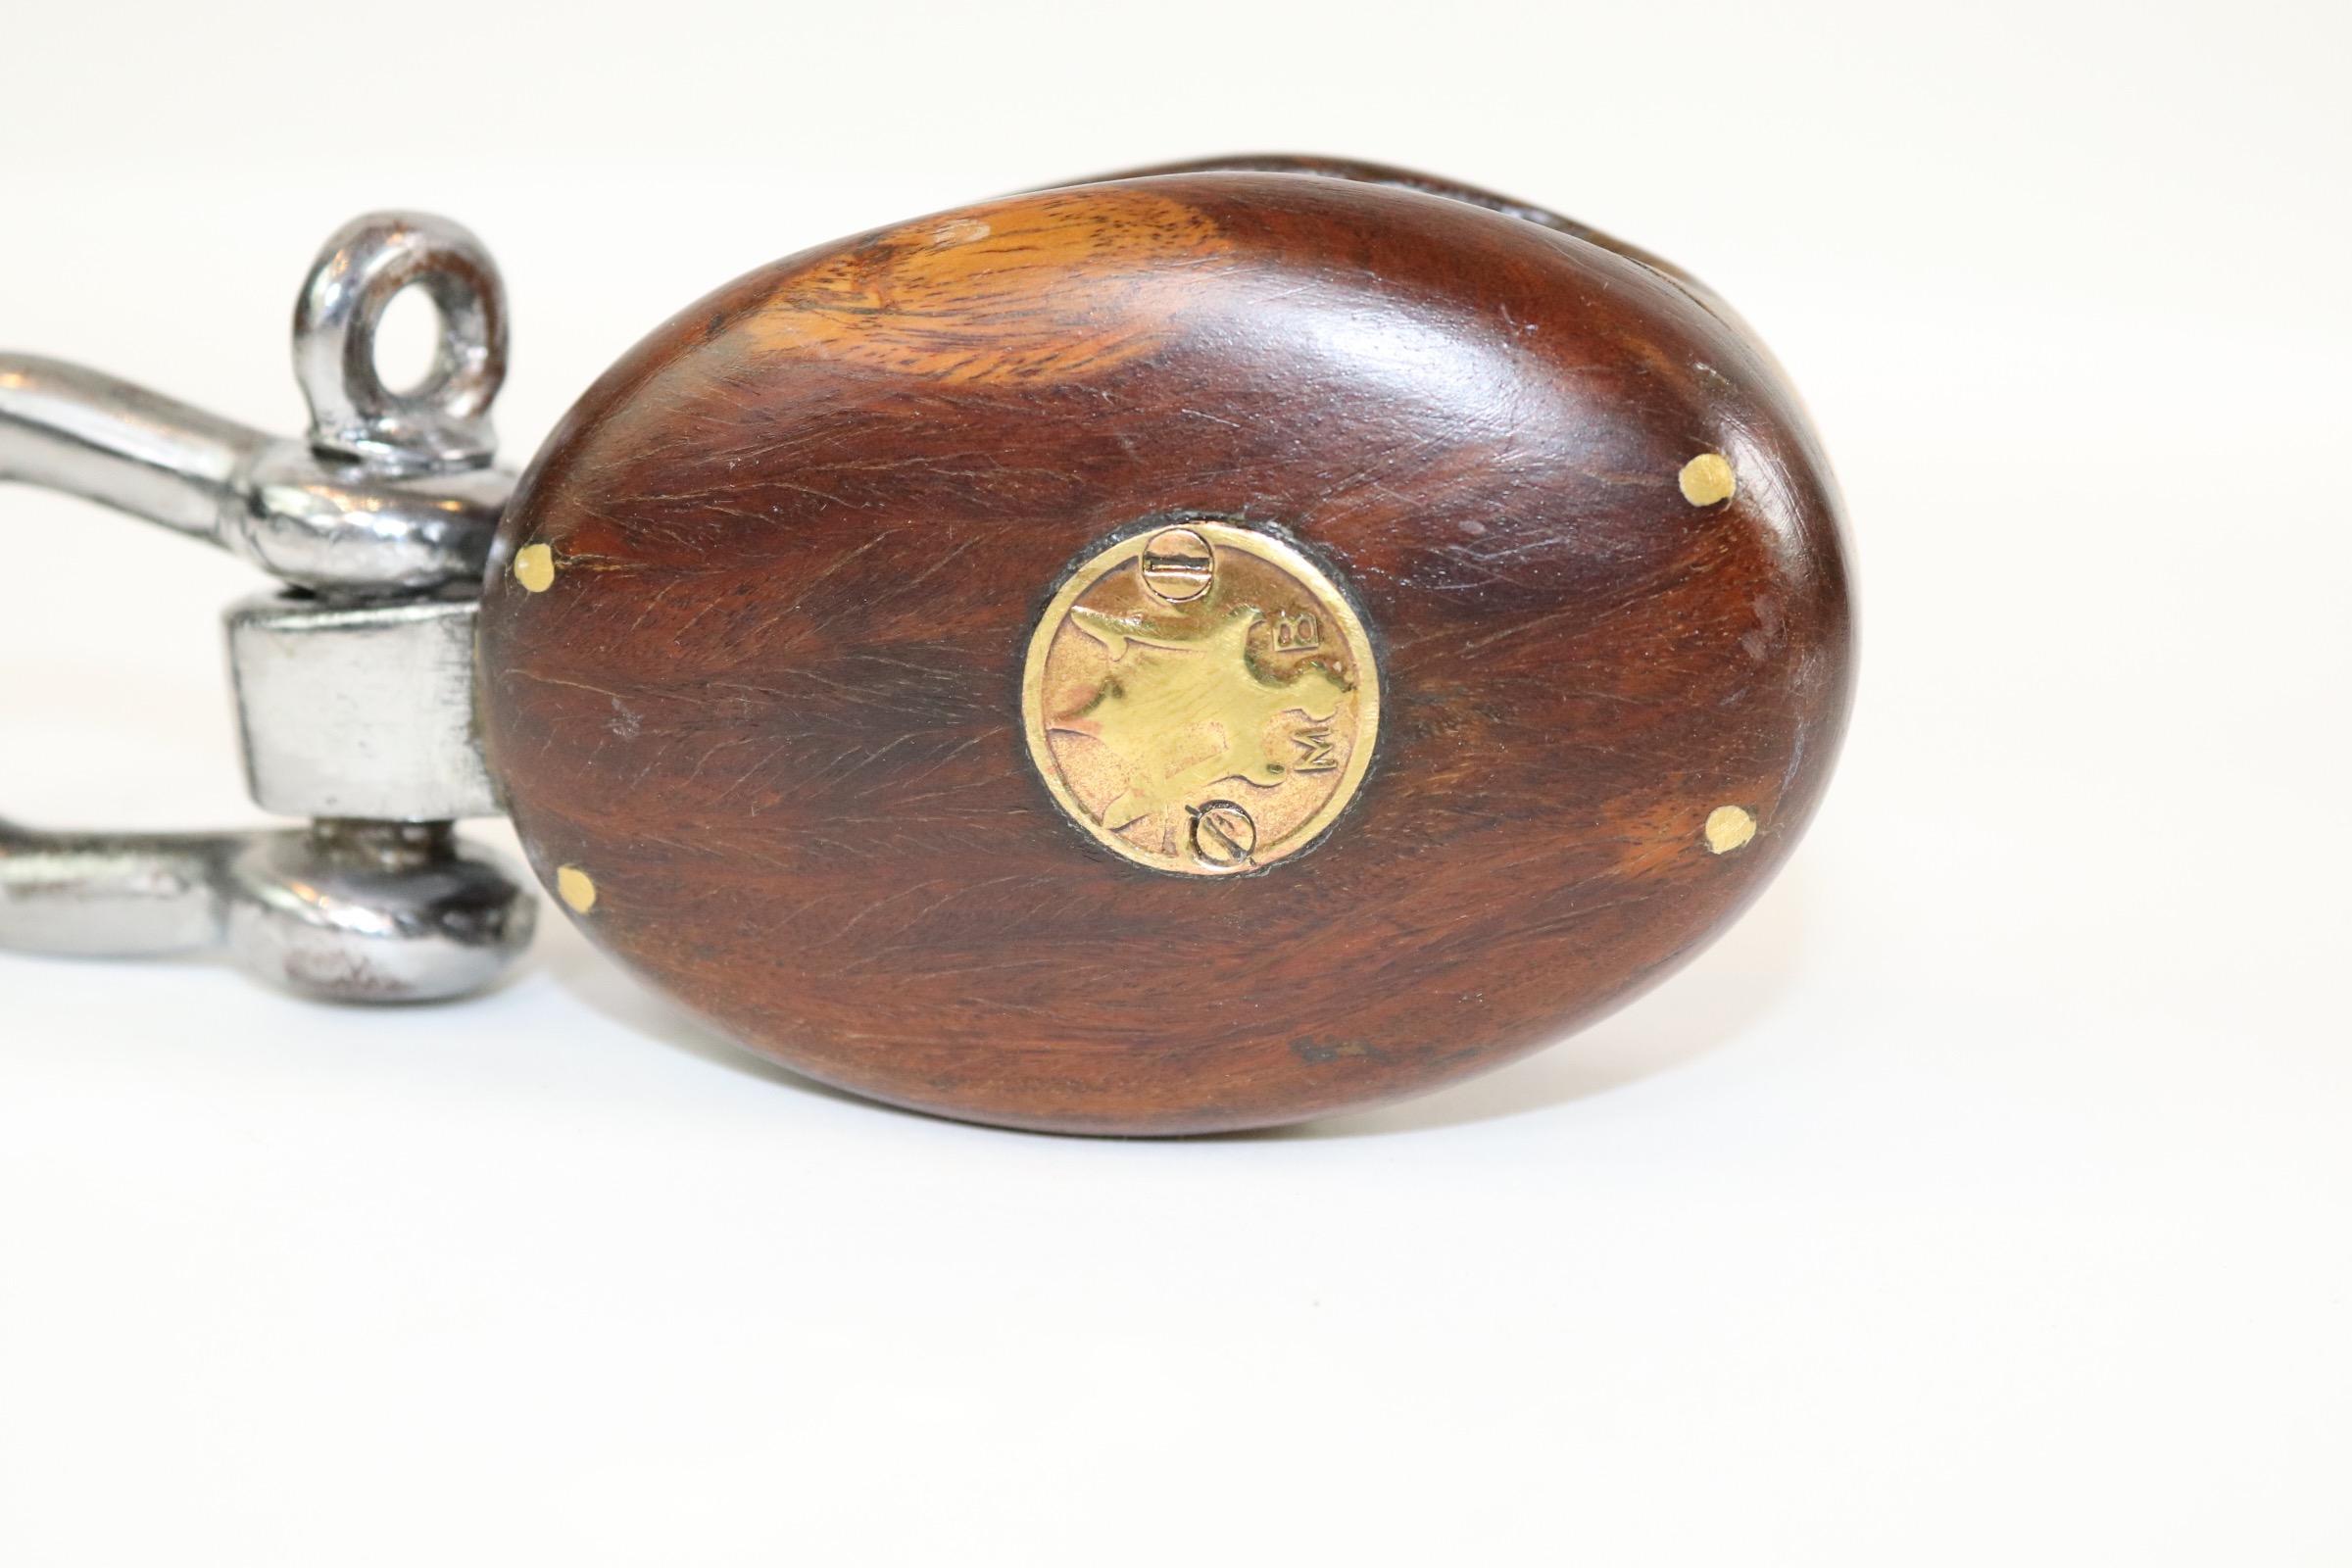 Single sheave yacht pulley by Merriman. With polished and lacquered steel fittings and polished brass pulley wheel. Awesome restoration. Weight is 2 pounds. X-128